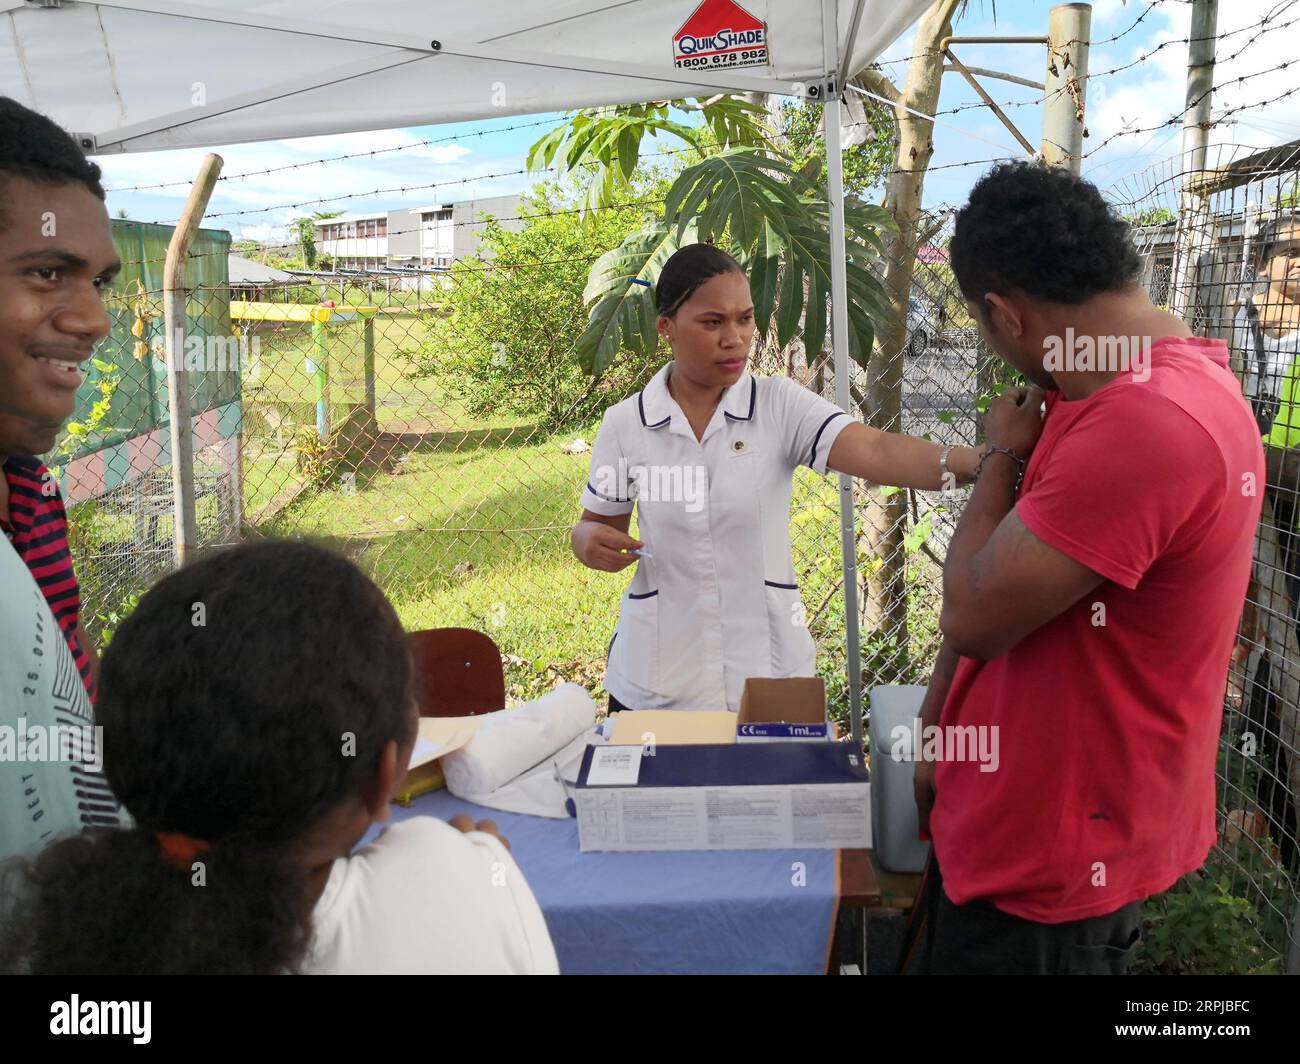 191204 -- SUVA, Dec. 4, 2019 -- A resident receives measles vaccine in Suva, Fiji, Dec. 4, 2019. The second phase of the measles immunization campaign began on Wednesday in Fiji s capital Suva. The immunization campaign targets children who have not received two doses of the measles vaccine, any child aged 12 and 18 months who is due for immunization, people travelling overseas, healthcare workers, and airport and hotel staff around the country. There are 15 confirmed measles cases in Fiji by Tuesday.  FIJI-SUVA-MEASLES IMMUNIZATION ZhangxYongxing PUBLICATIONxNOTxINxCHN Stock Photo